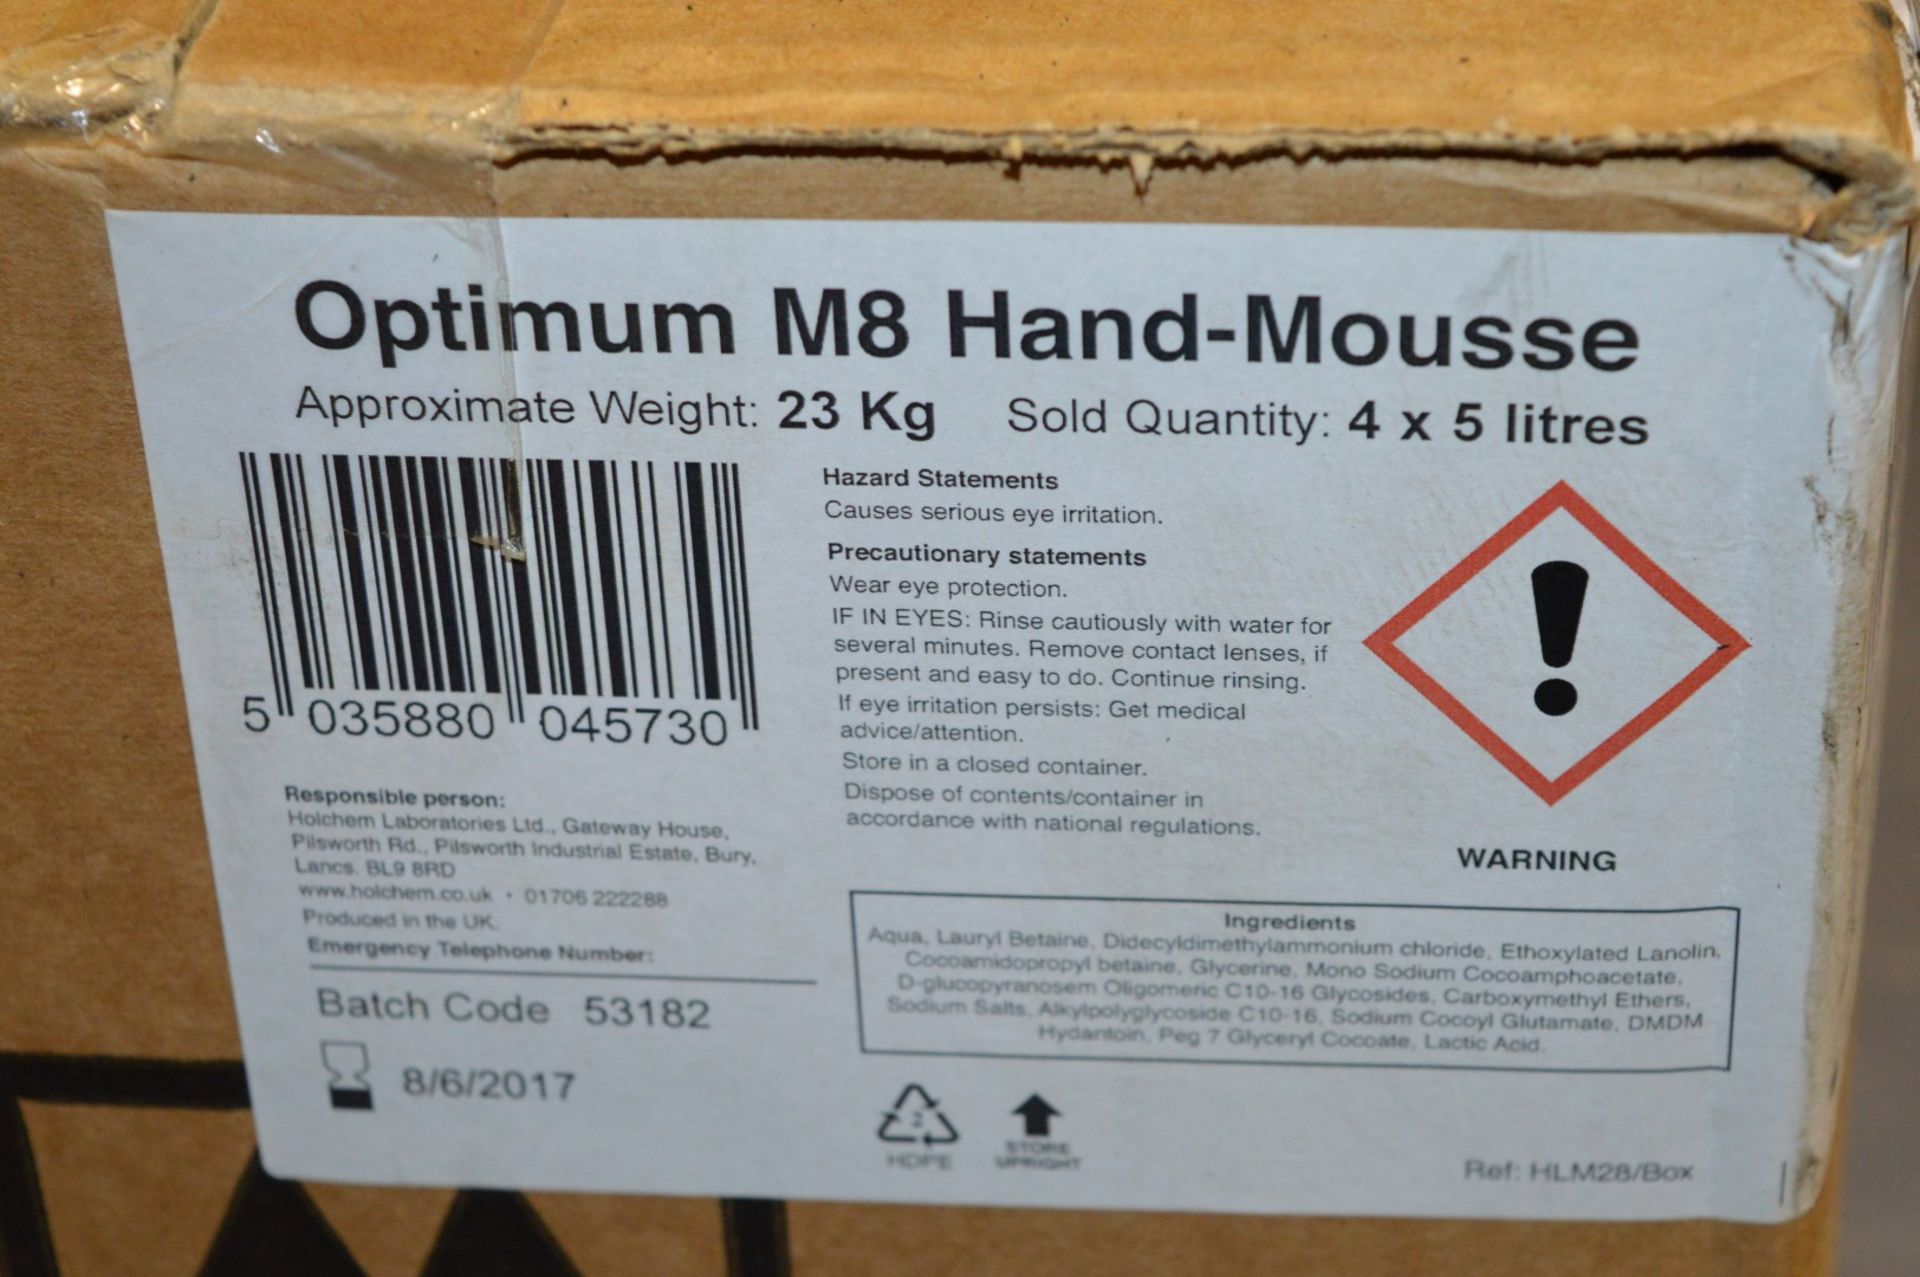 4 x 5 Litre Optimum M8 Hand Mousse - New Boxed Stock - CL282 - Ref MS120 - Location: Altrincham WA14 - Image 3 of 3